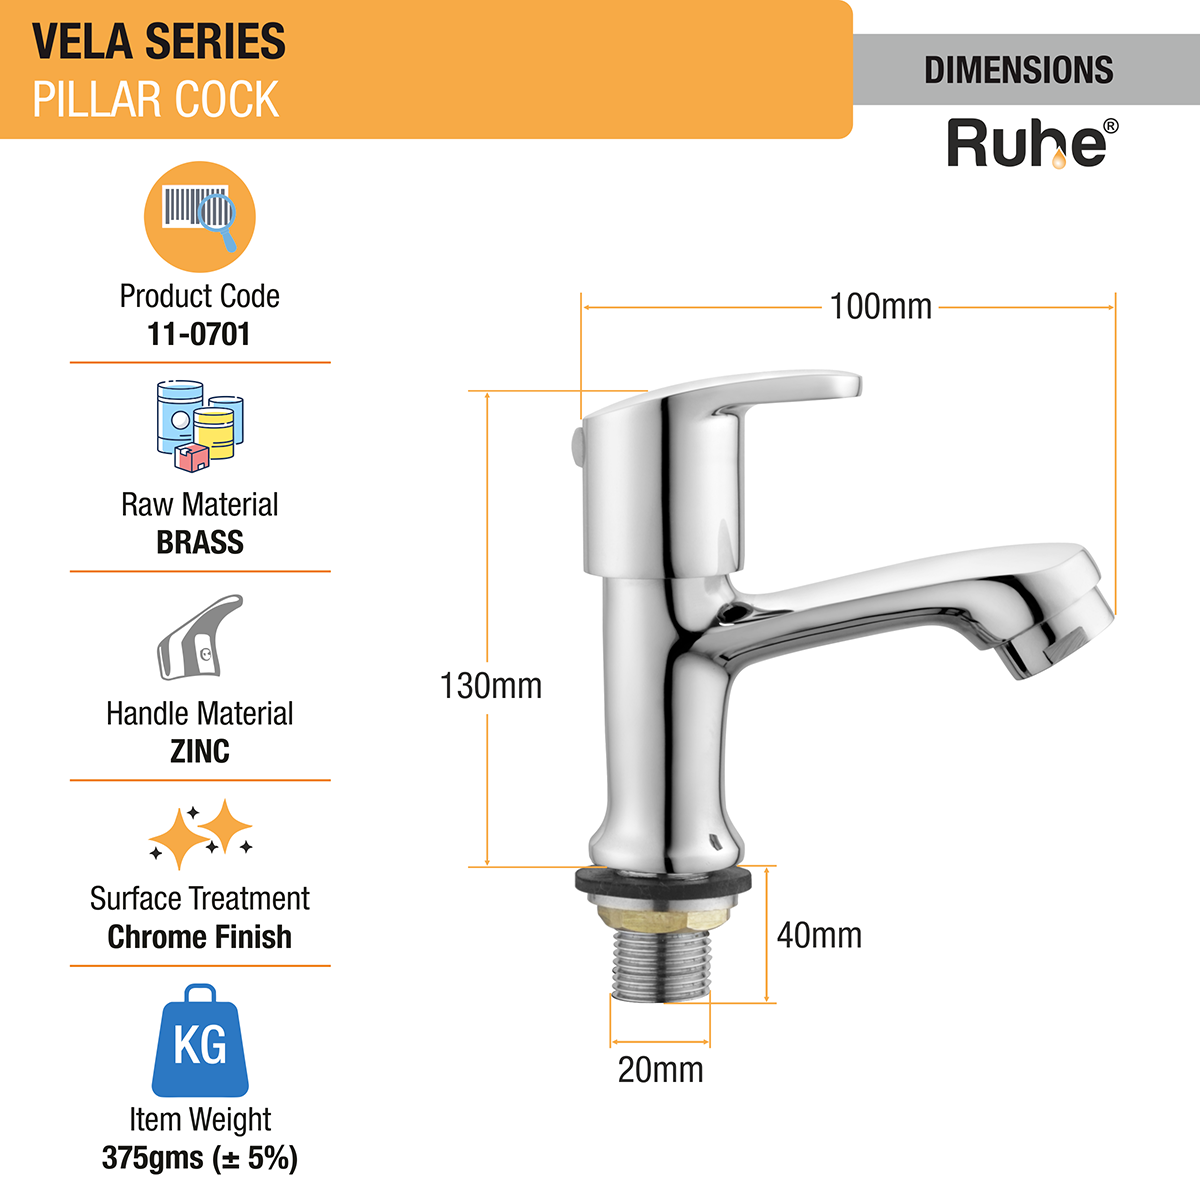 Vela Pillar Tap Brass Faucet dimensions and sizes